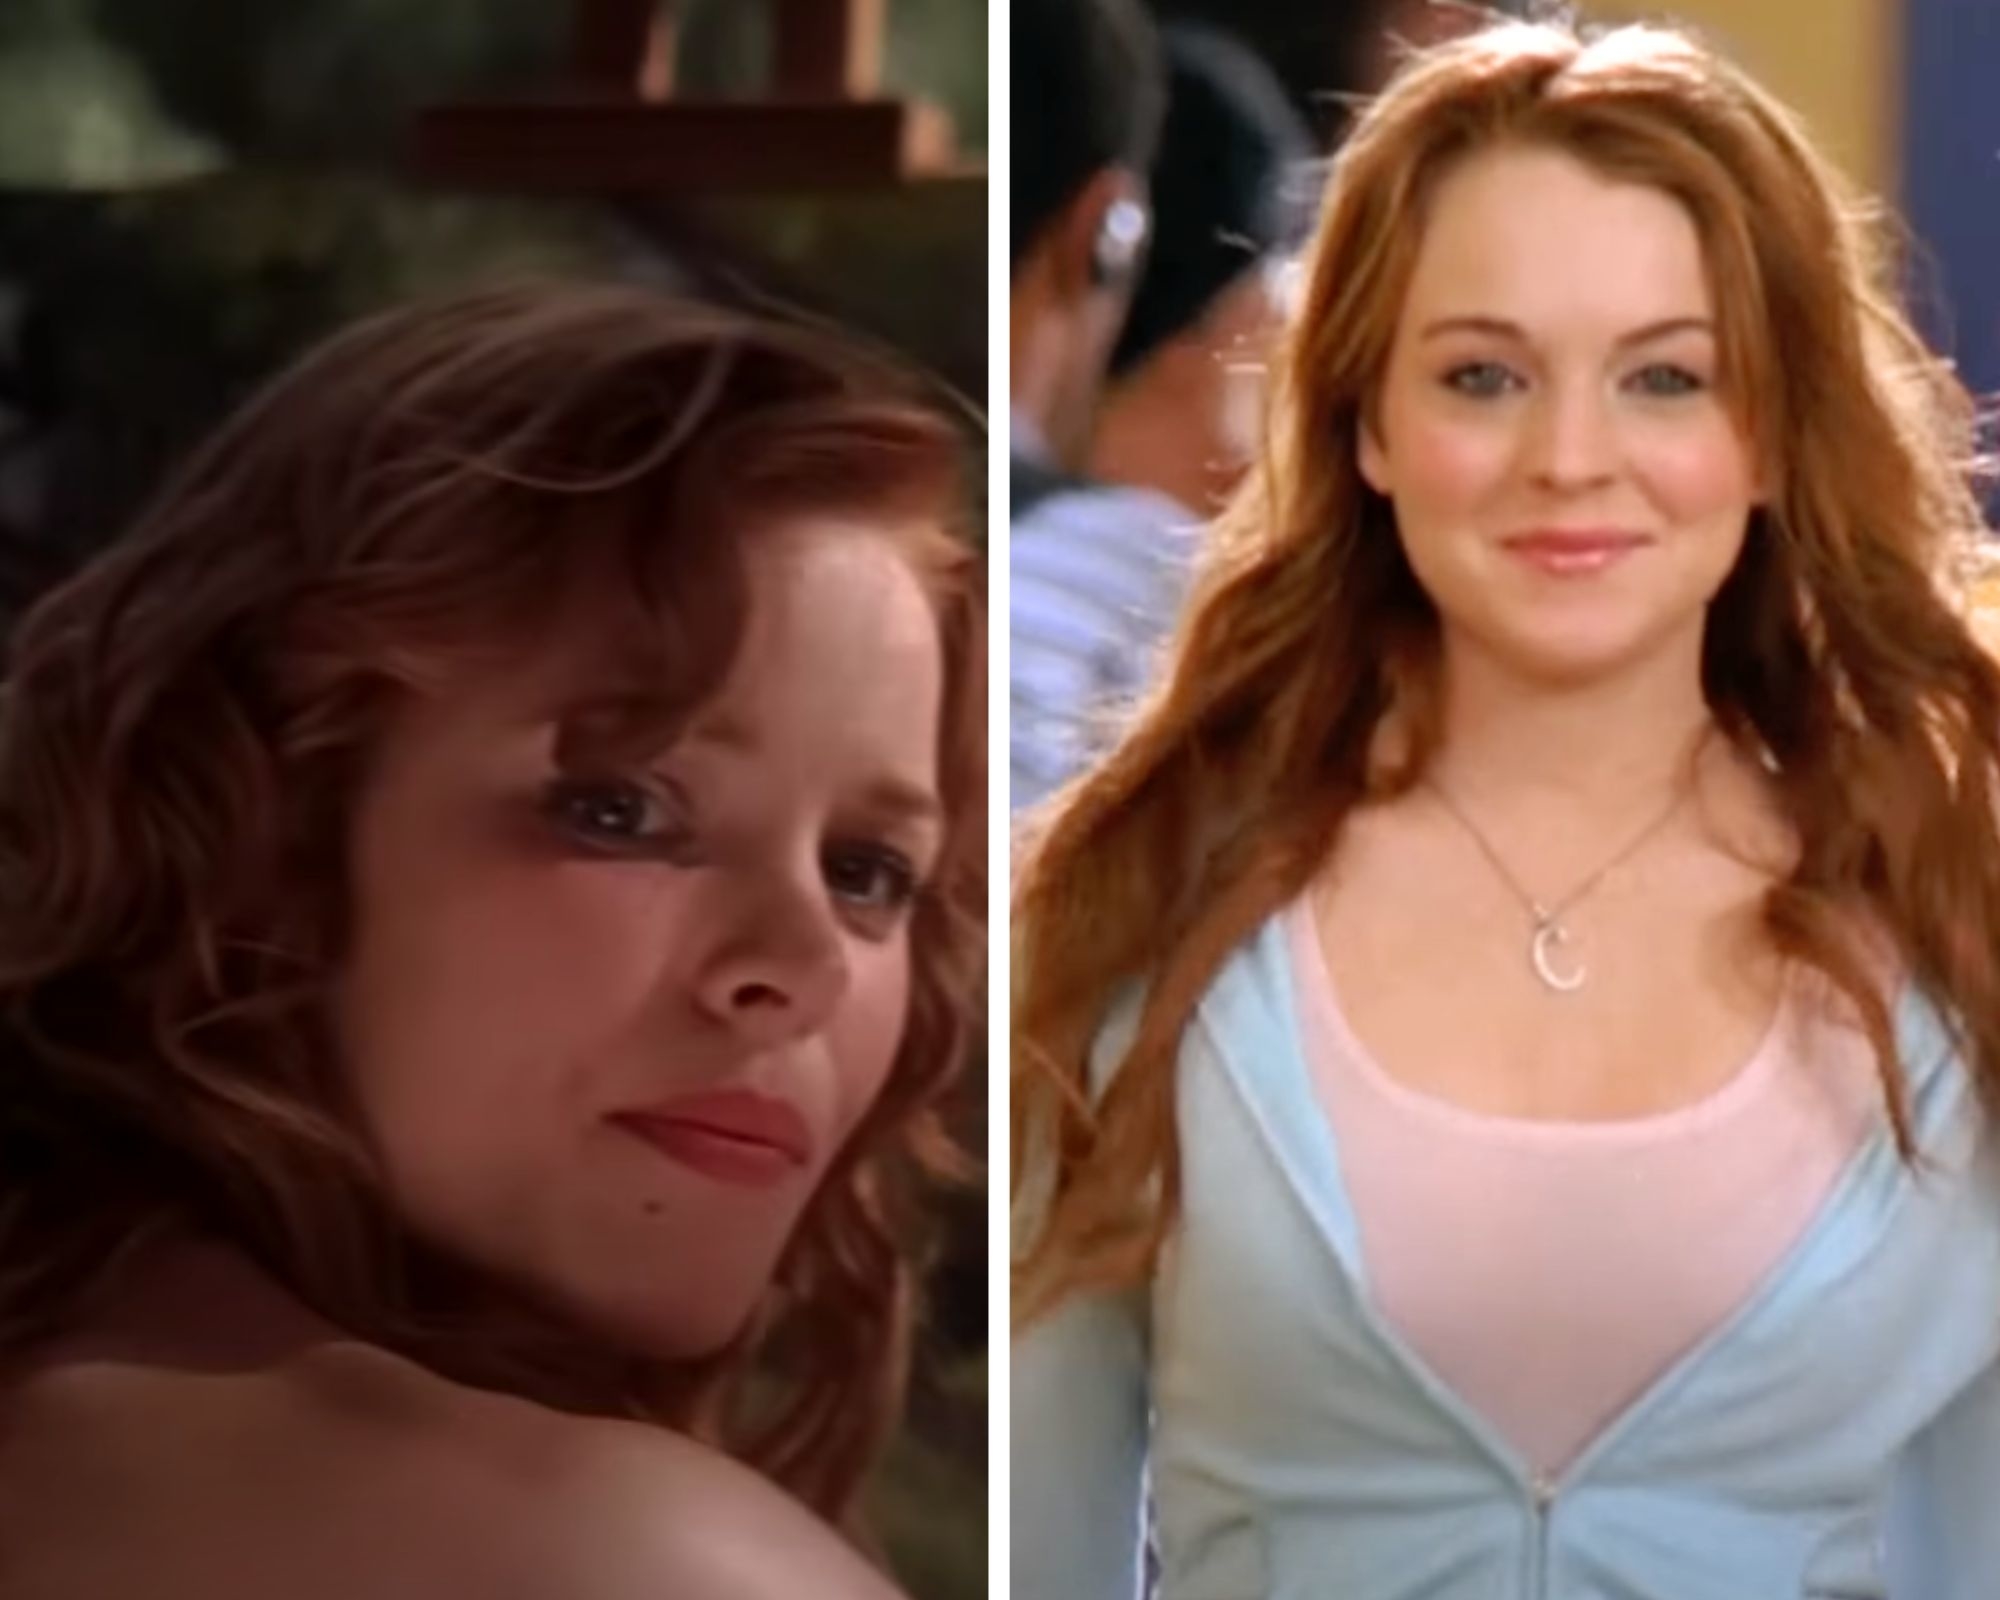 Rachel McAdams in The Notebook and Lindsay Lohan in Mean Girls